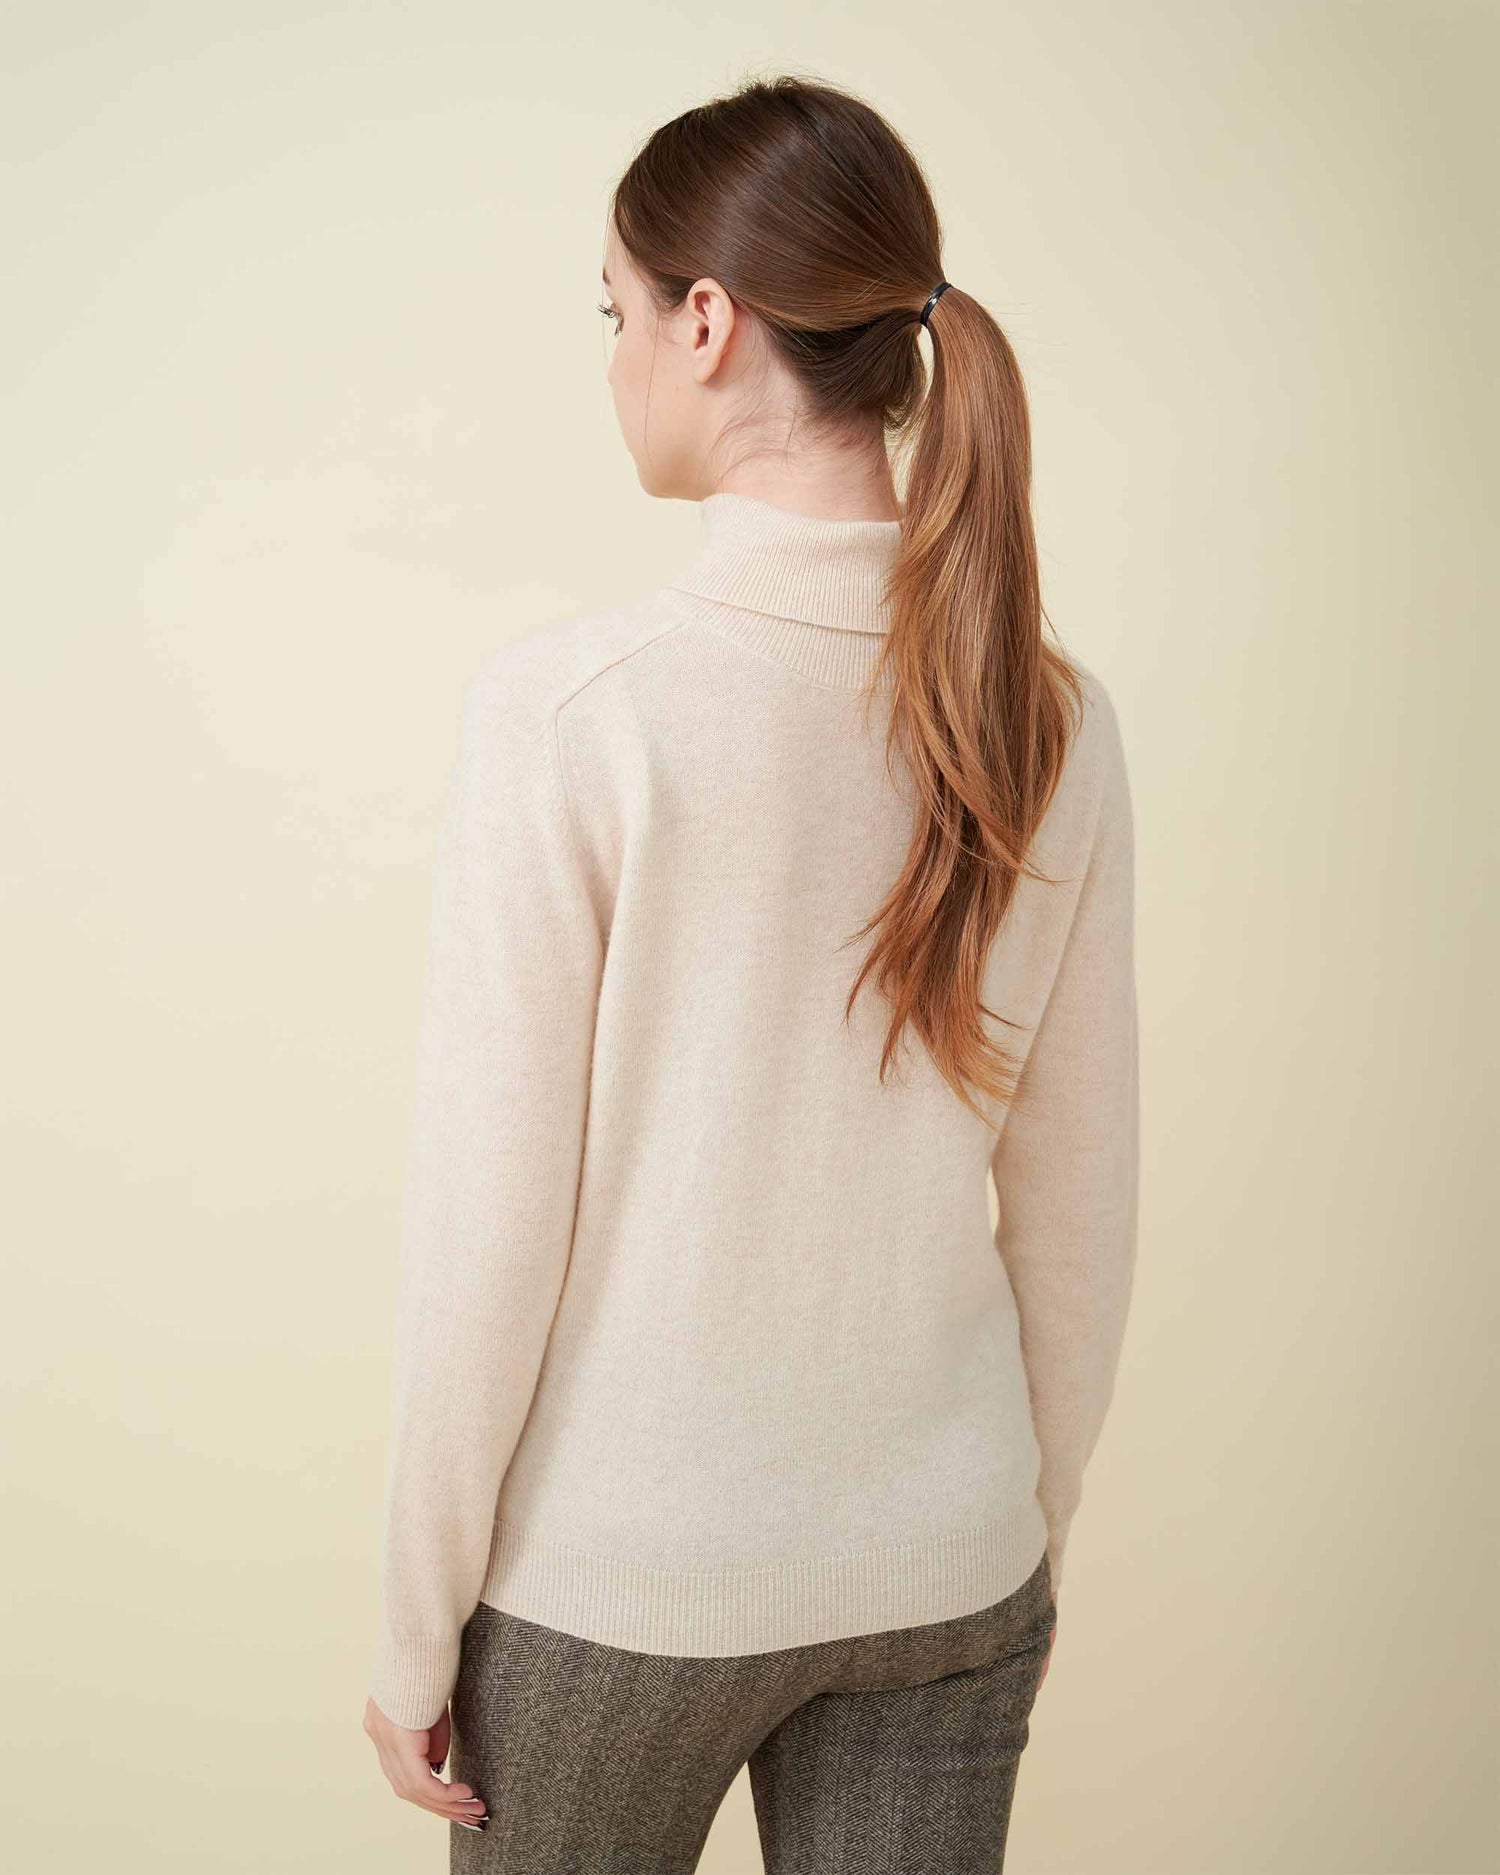 A back view finely knitted turtleneck sweater, Cashmere sweater , DAVINII , soft and comfy